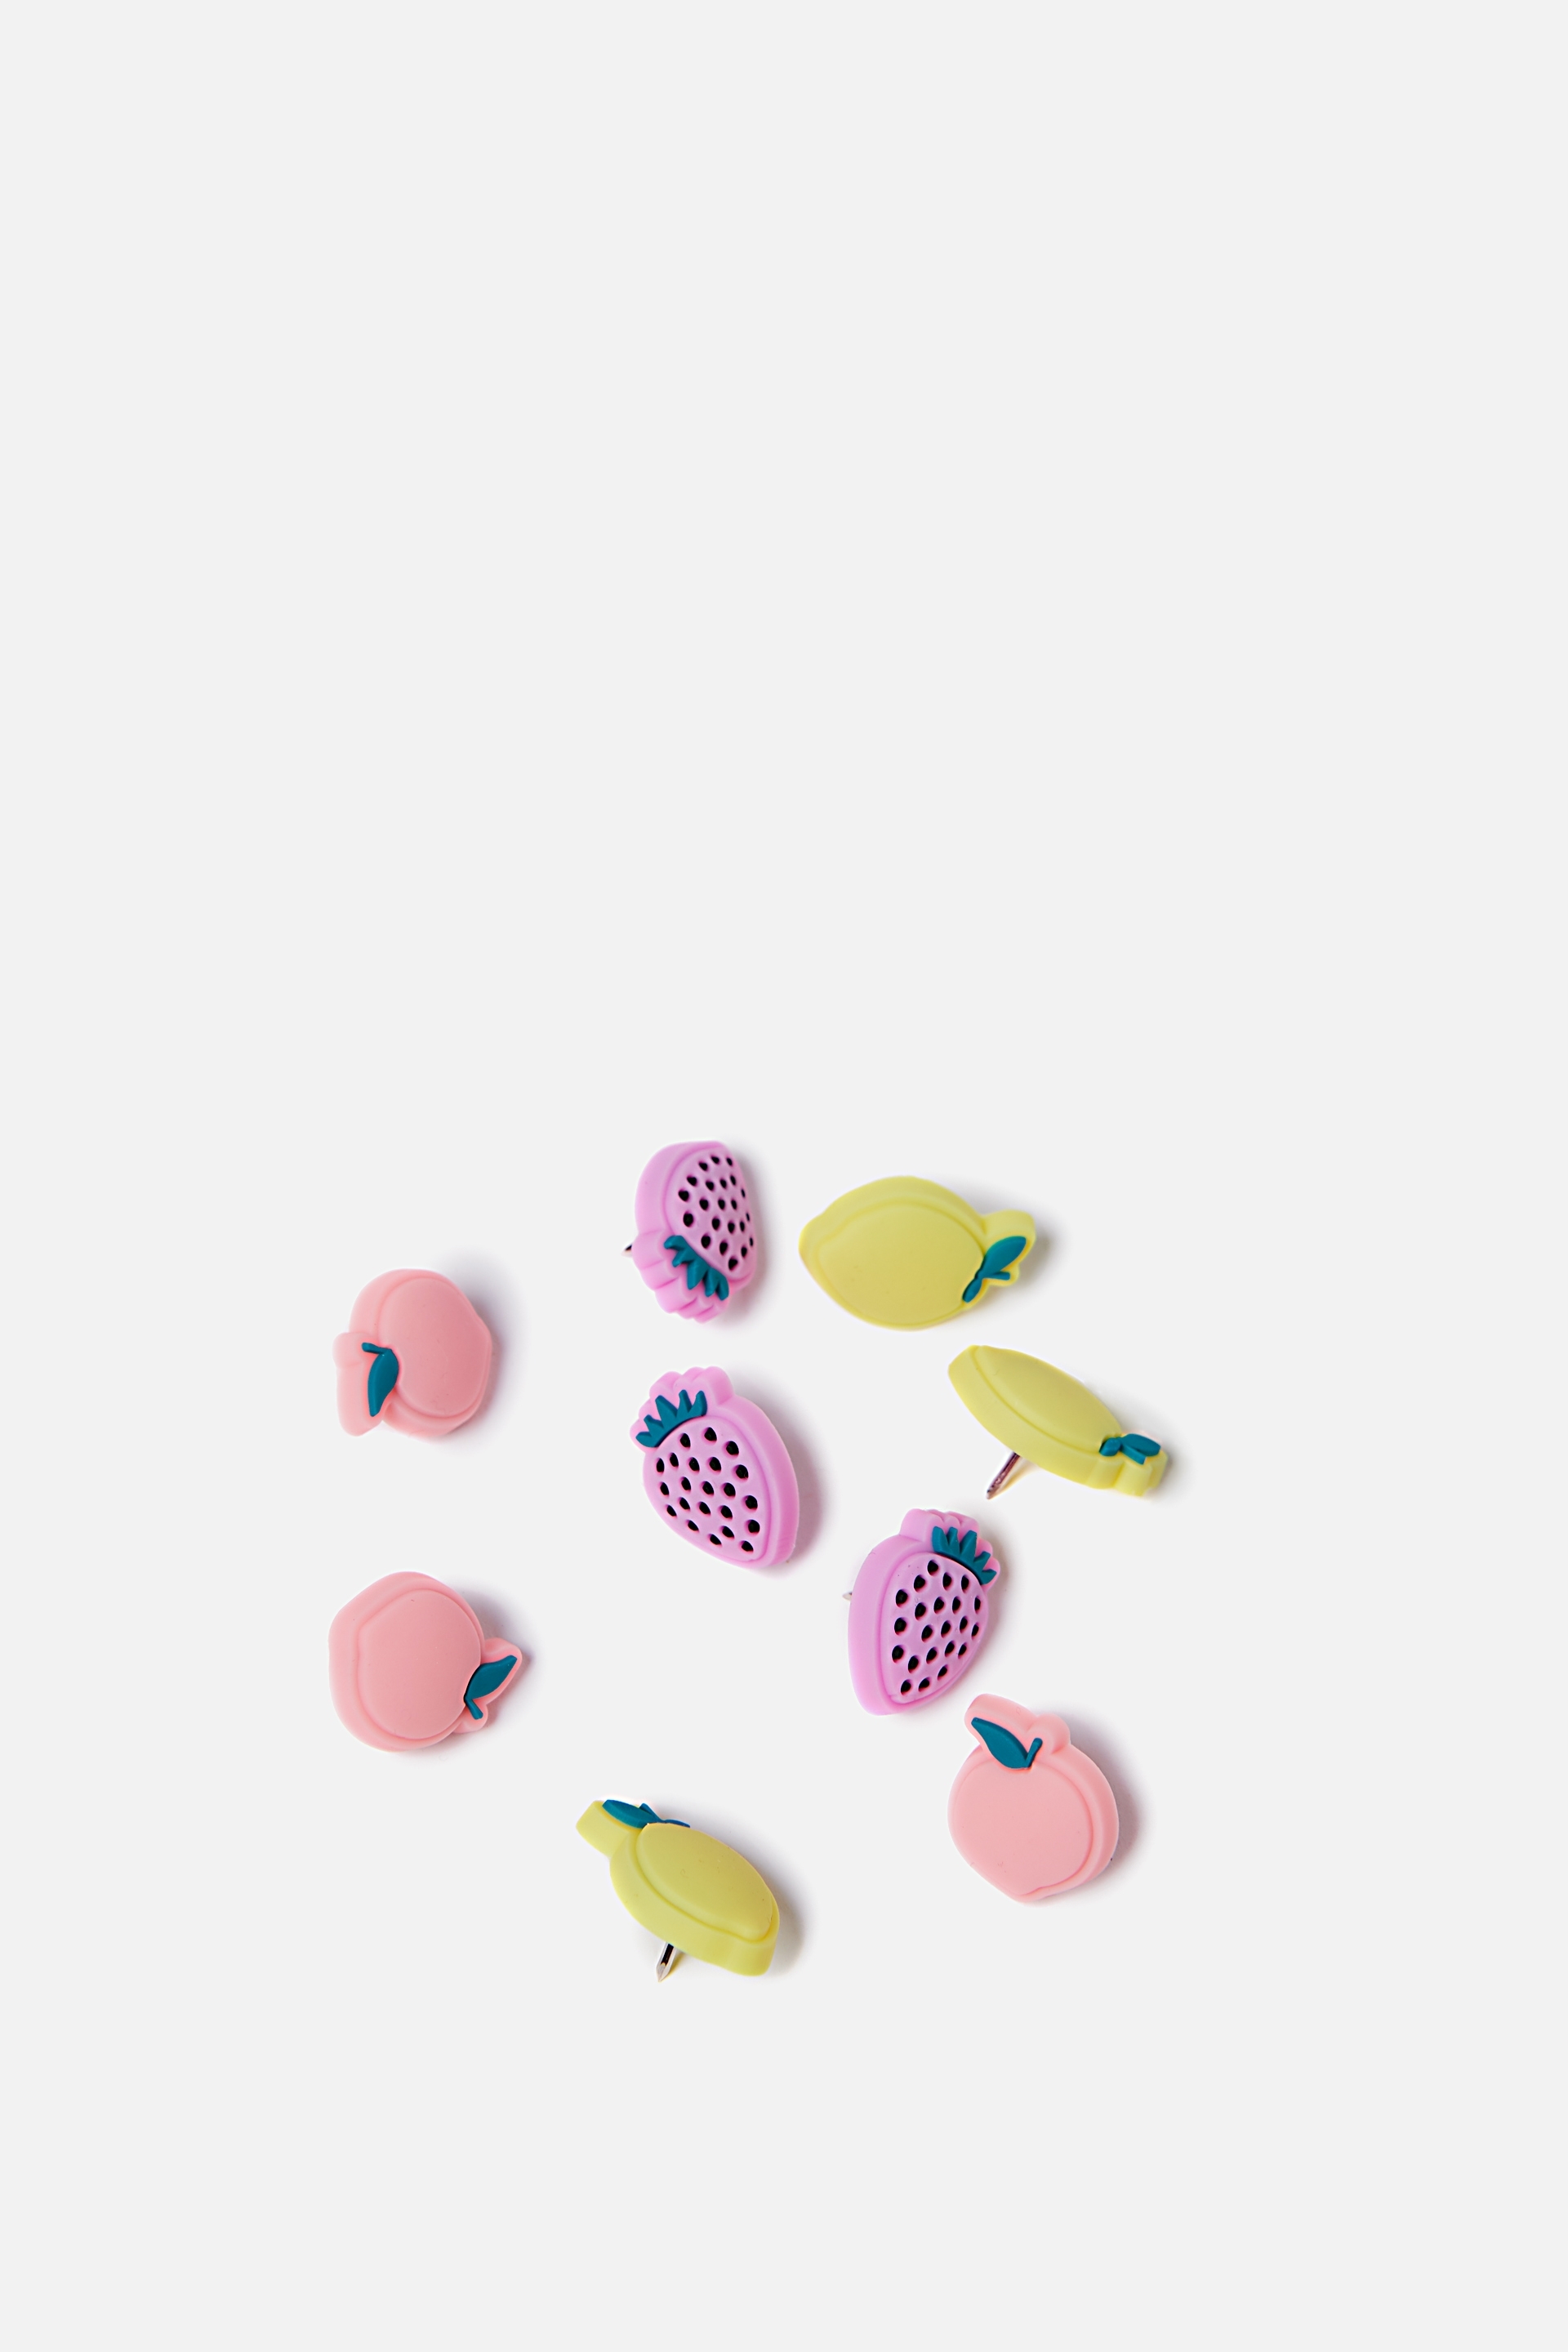 Fruit-push-pins-from-Typo